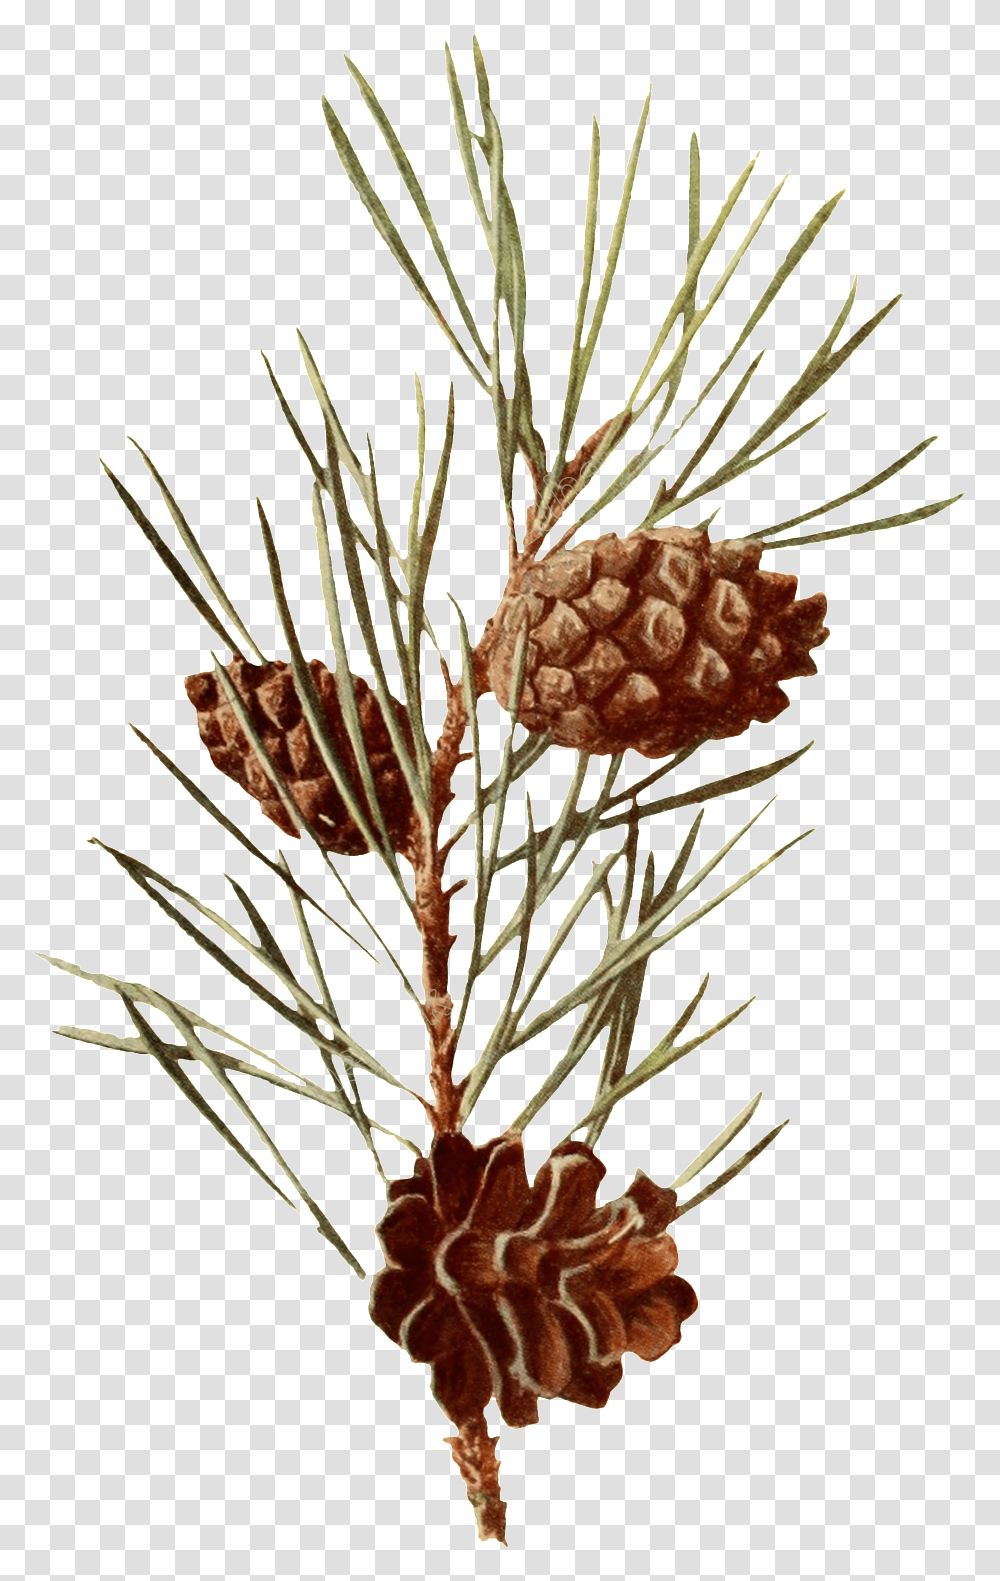 Pine Branches Watercolor Vector Scots Pine Botanical Illustration, Ornament, Nature, Outdoors, Pineapple Transparent Png